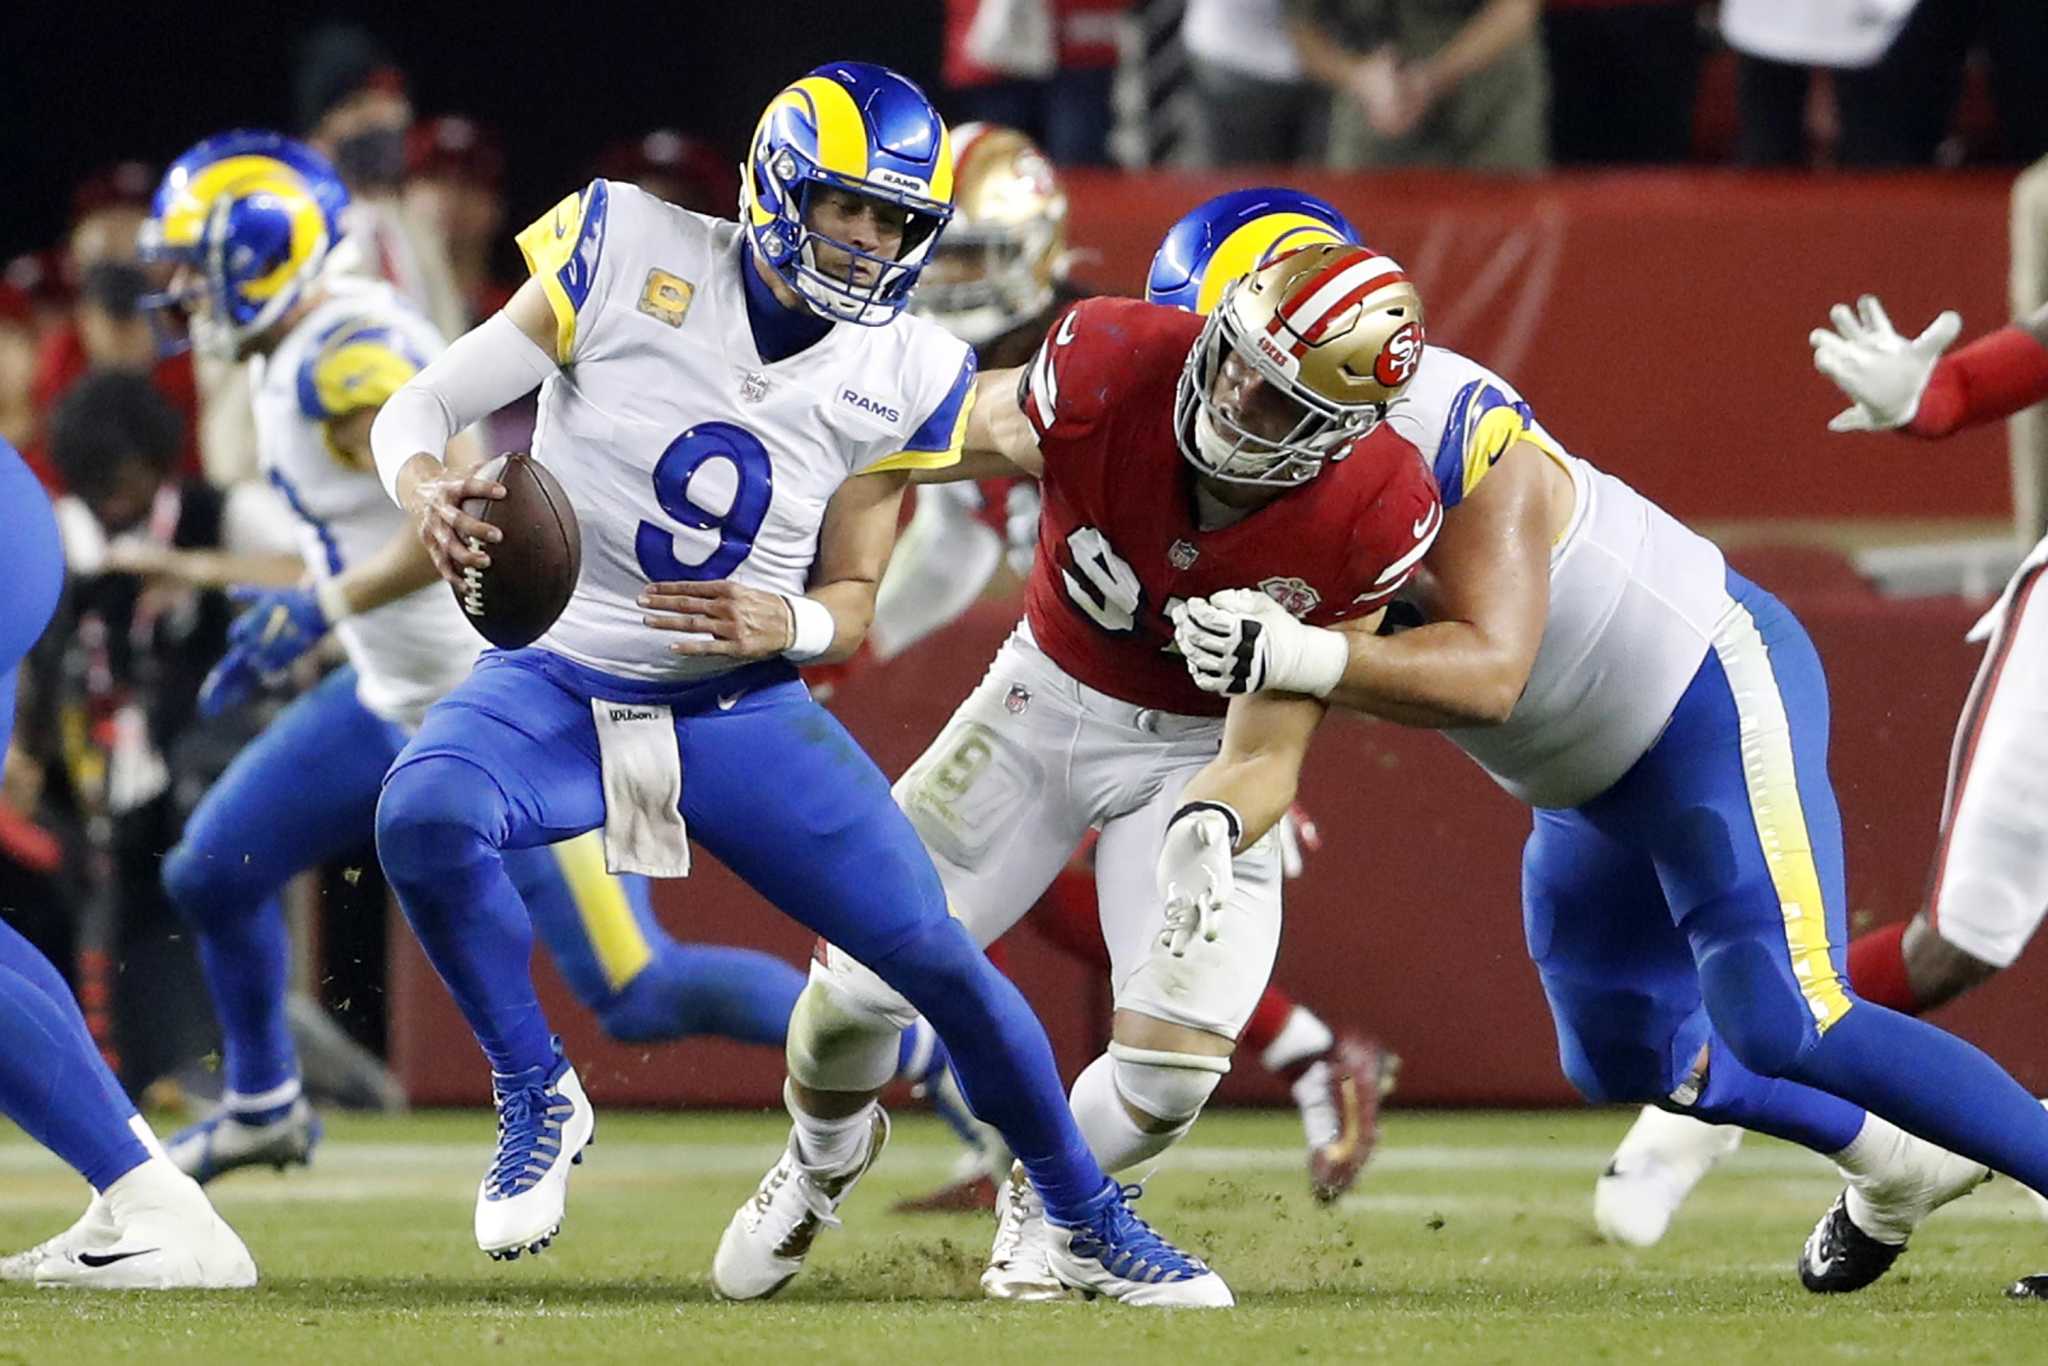 2021 NFL playoffs: What to watch for in 49ers-Rams NFC Championship Game